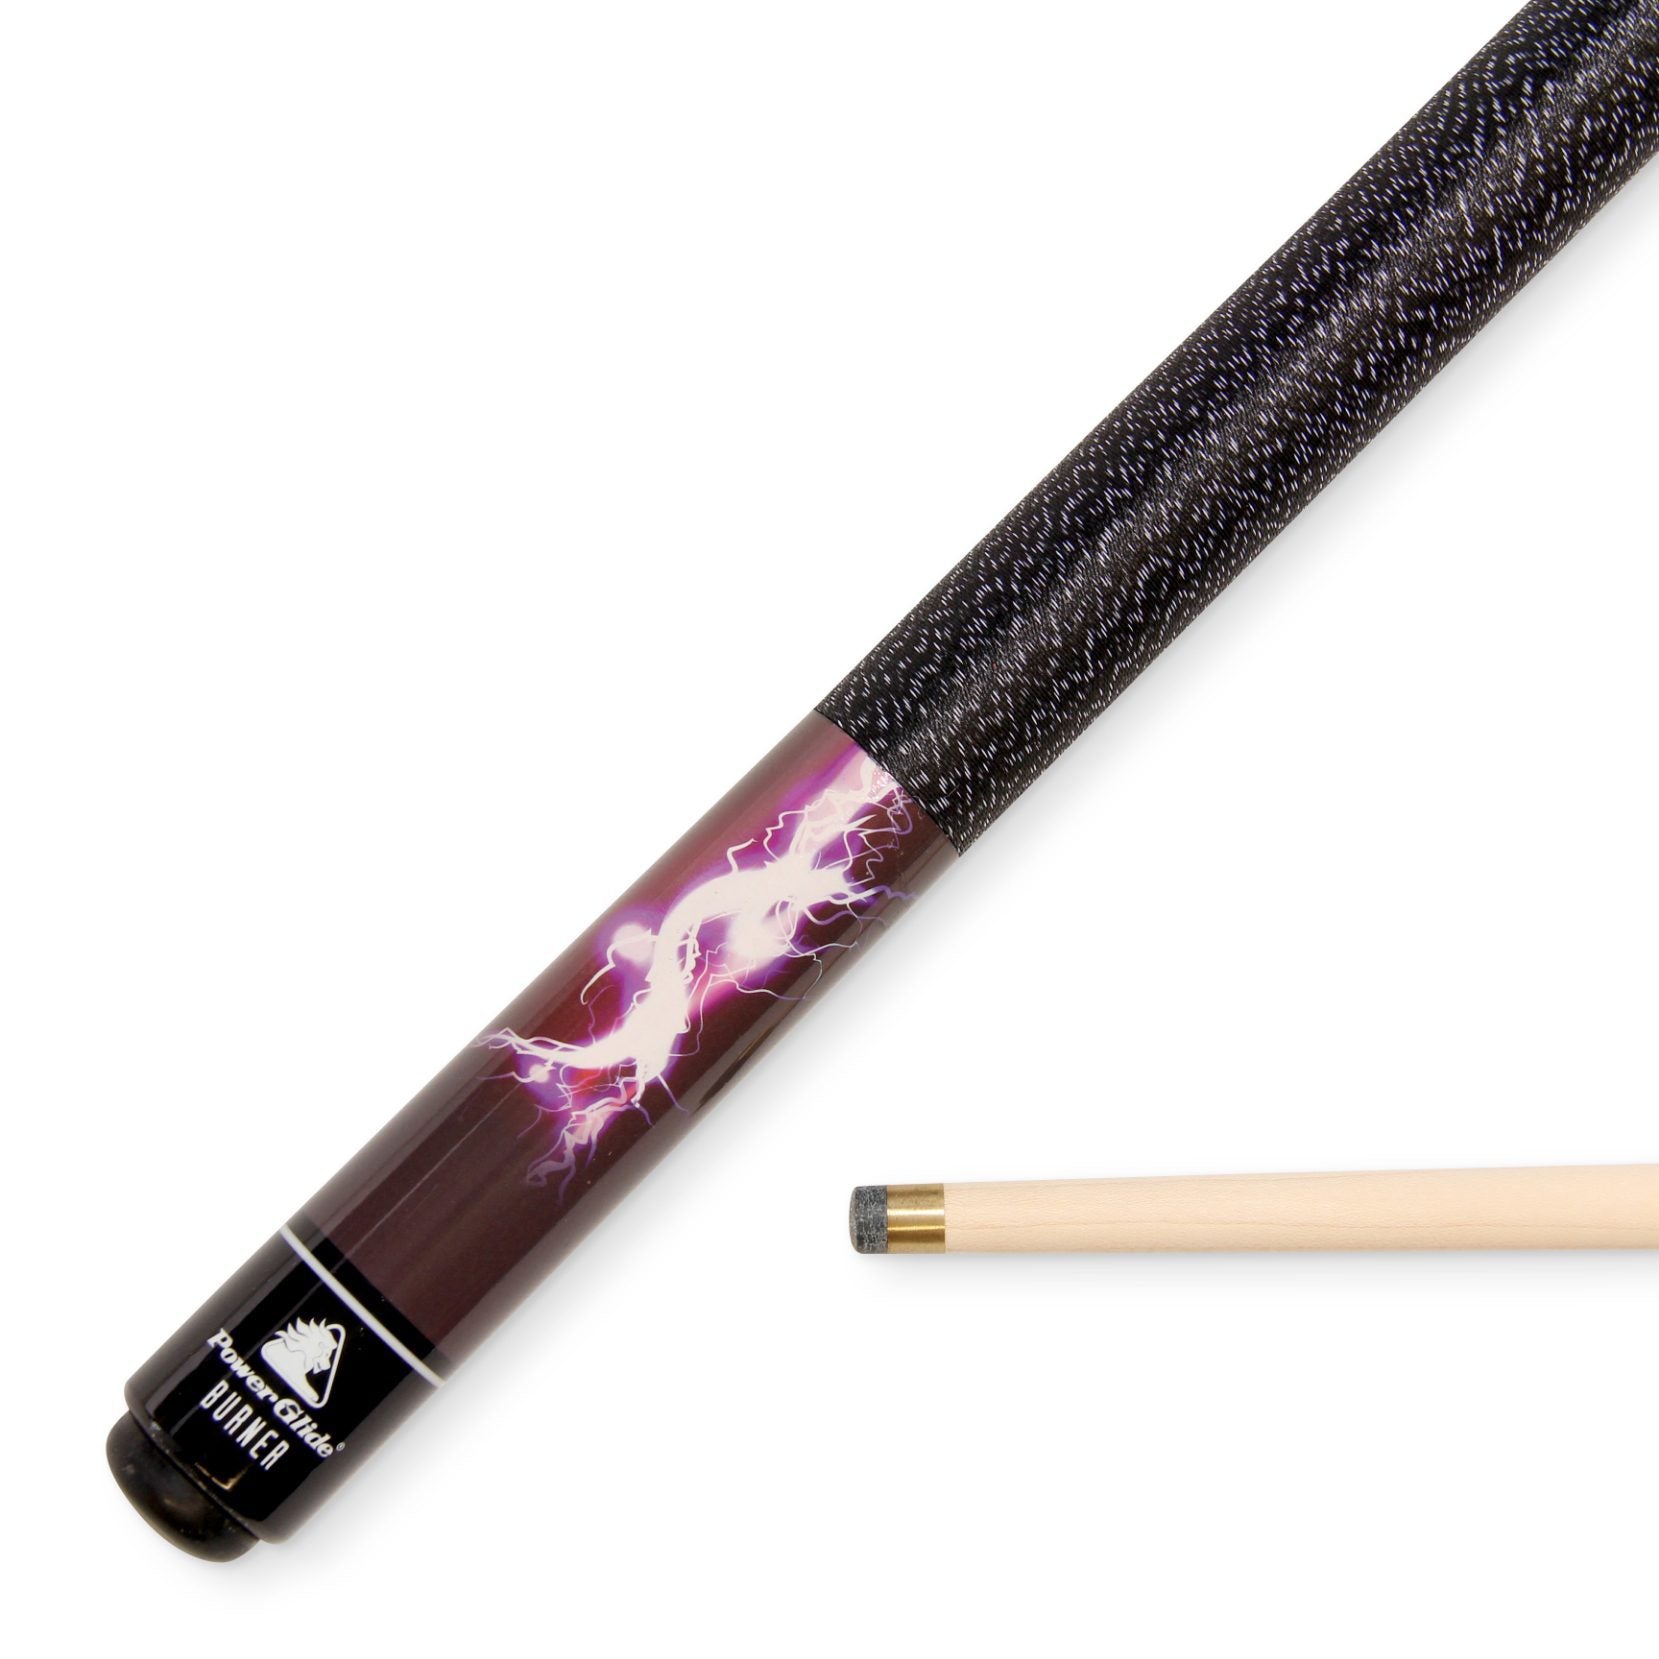 PowerGlide BURNER Centre Joint Pool Snooker Cue - 10mm Tip